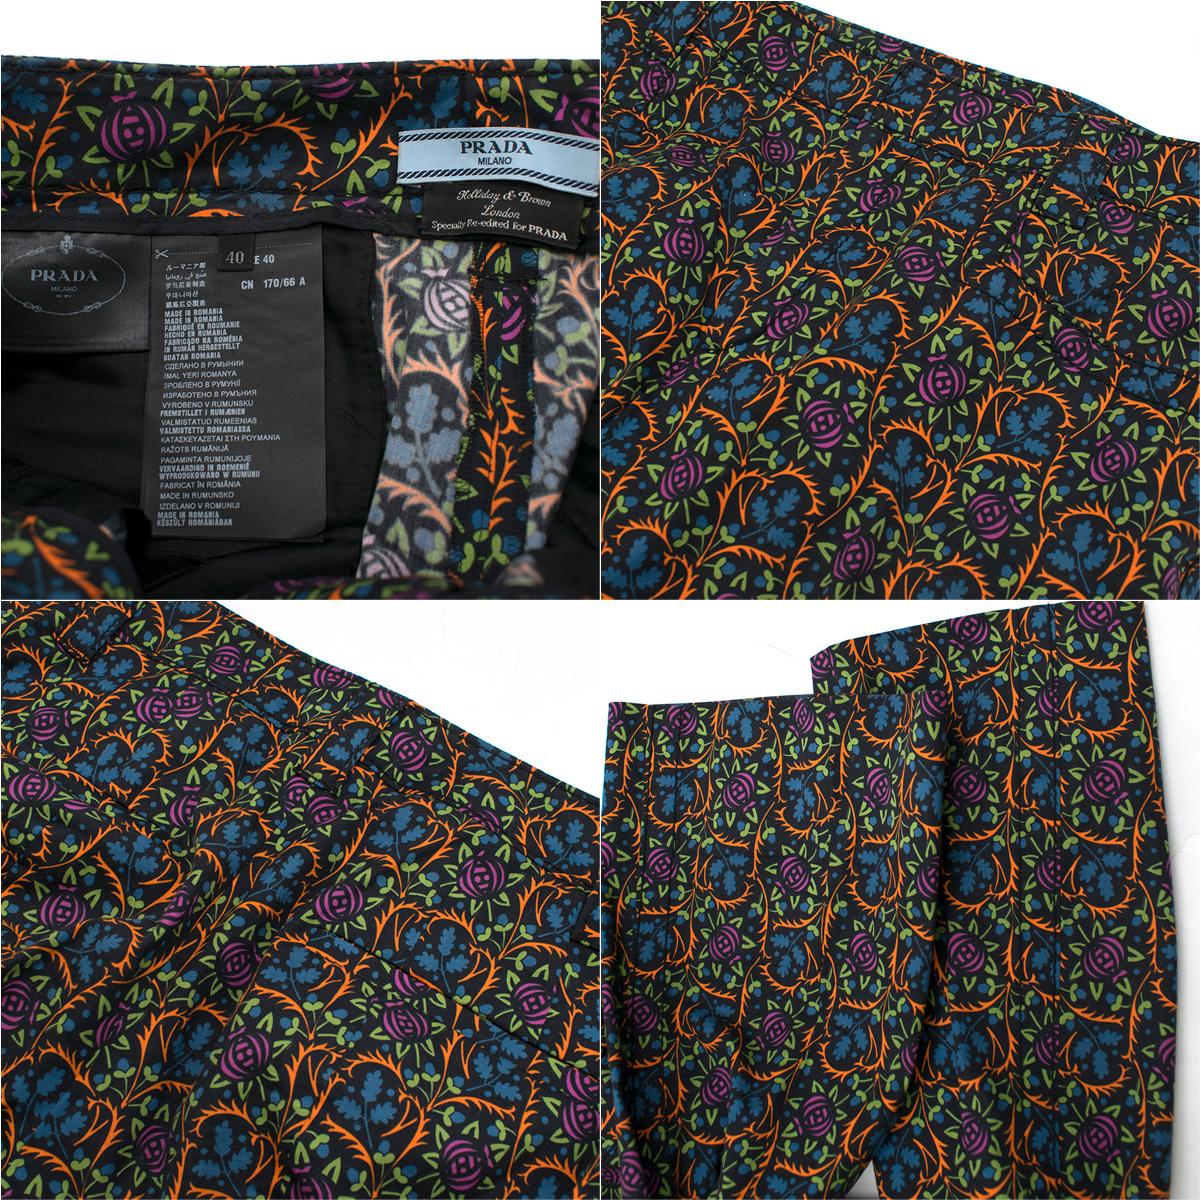 Prada by Holliday & Brown Printed Top & Trousers SIZE Top US 2/ Trousers US 4 5